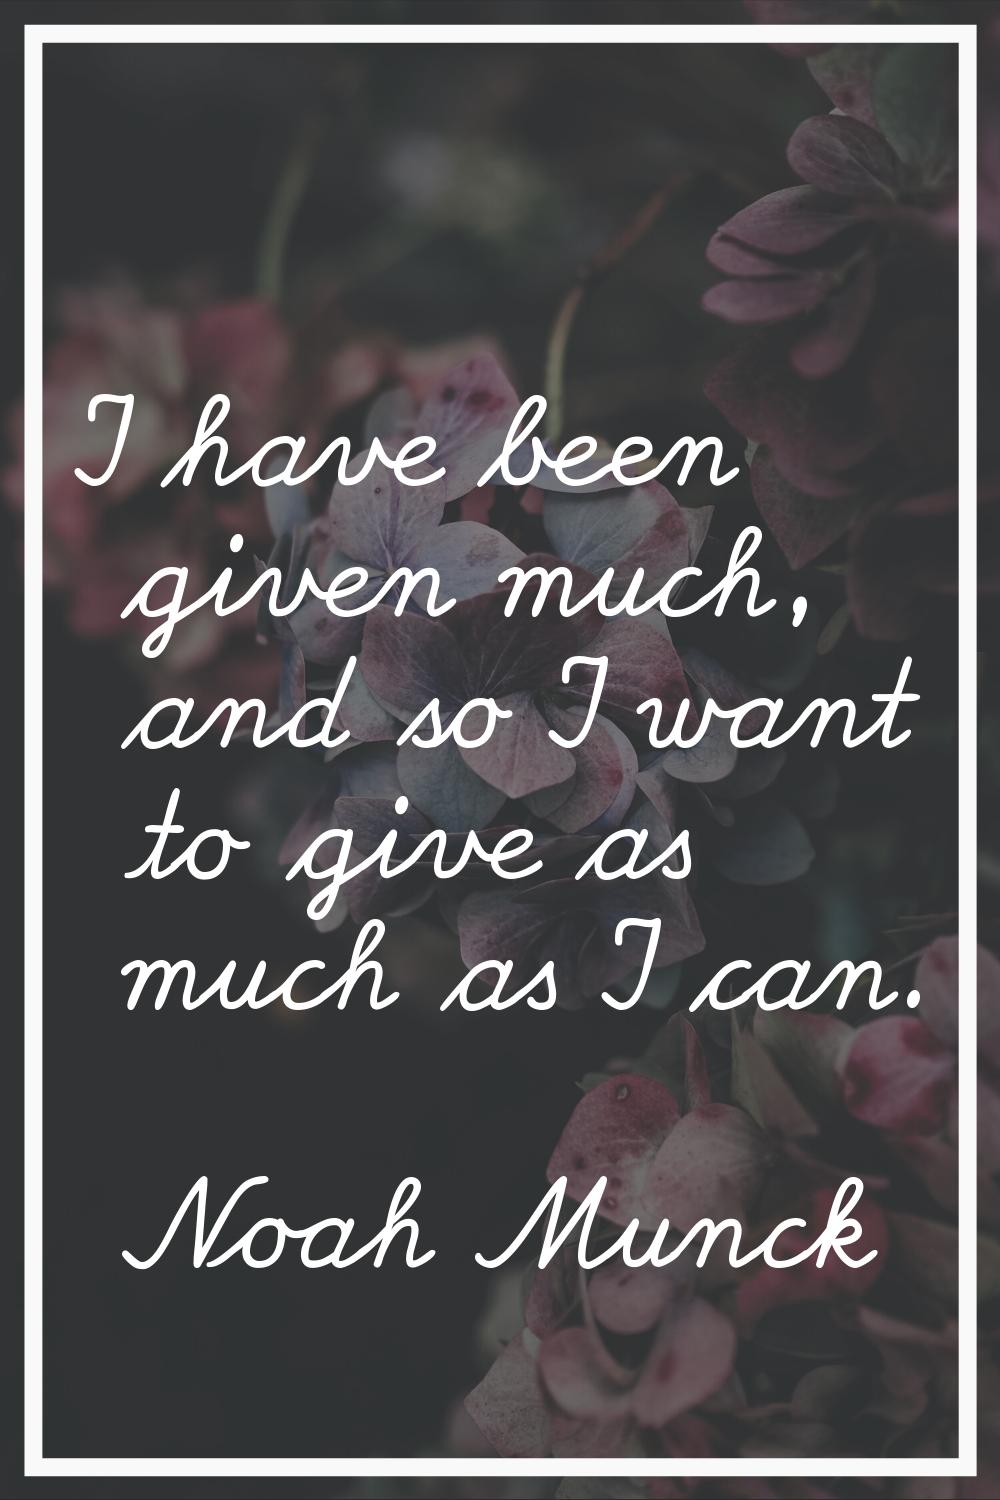 I have been given much, and so I want to give as much as I can.